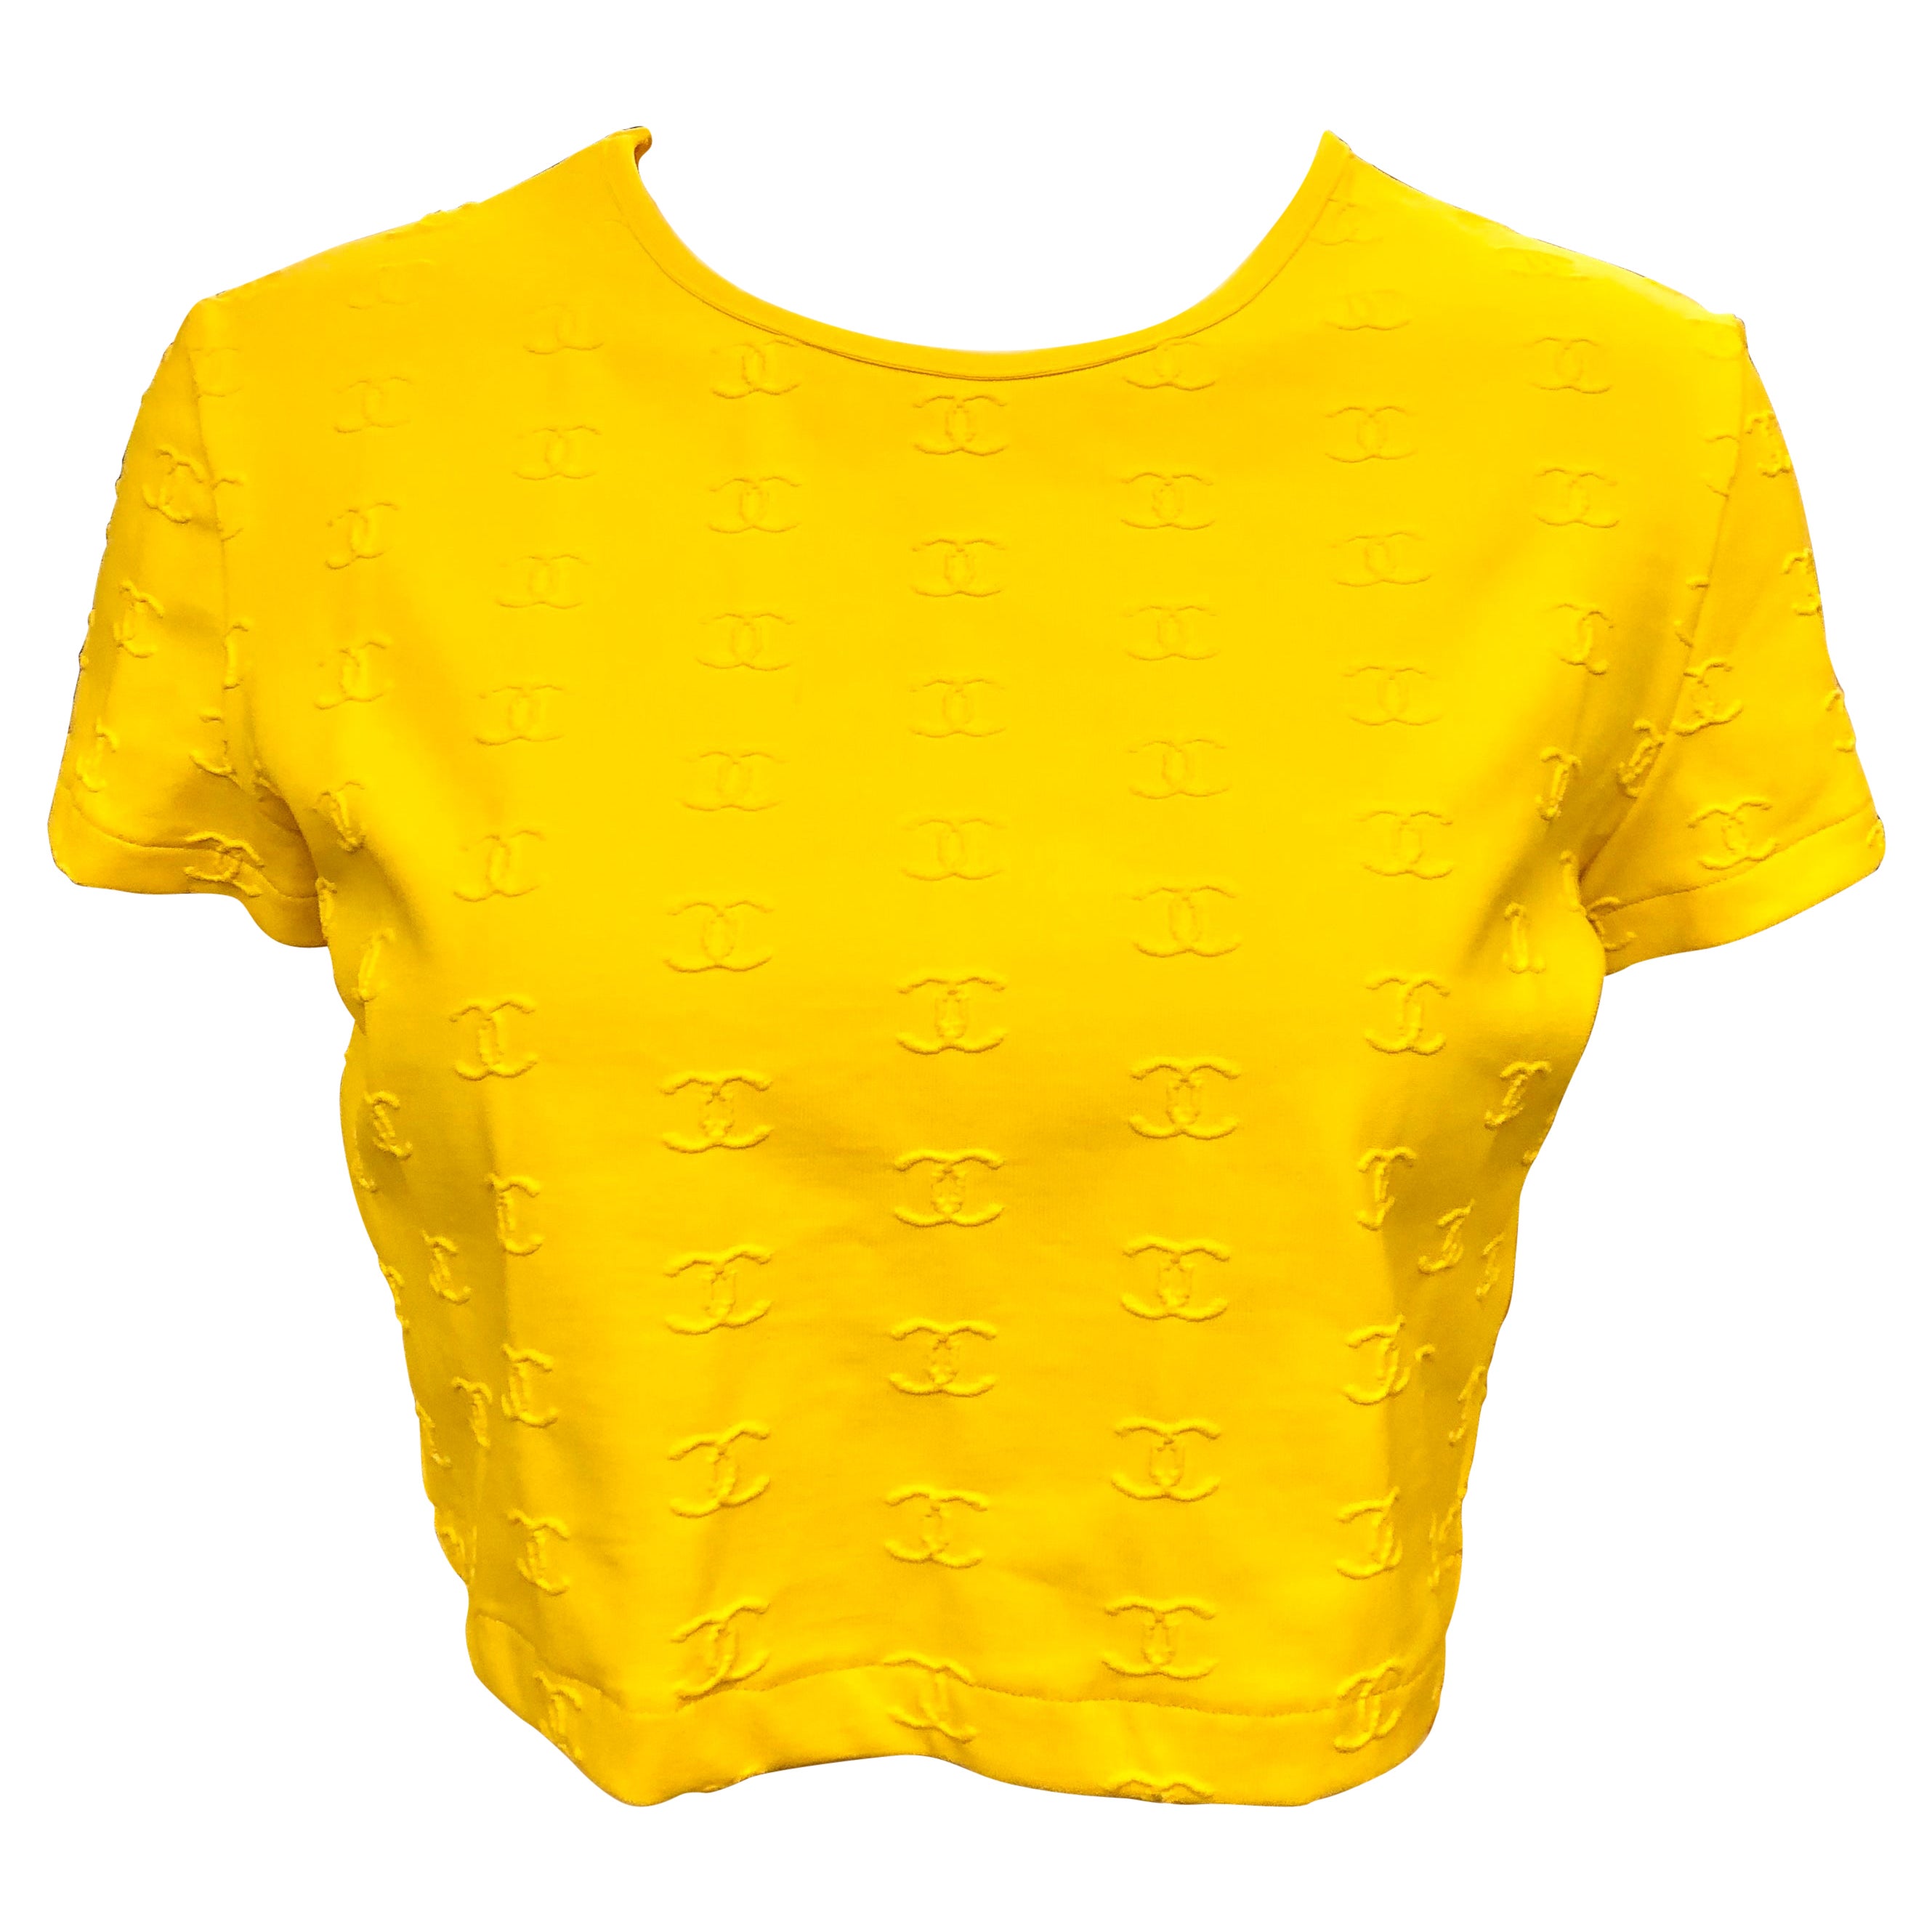 Chanel Spring 1997 Yellow “CC” Cropped Top 